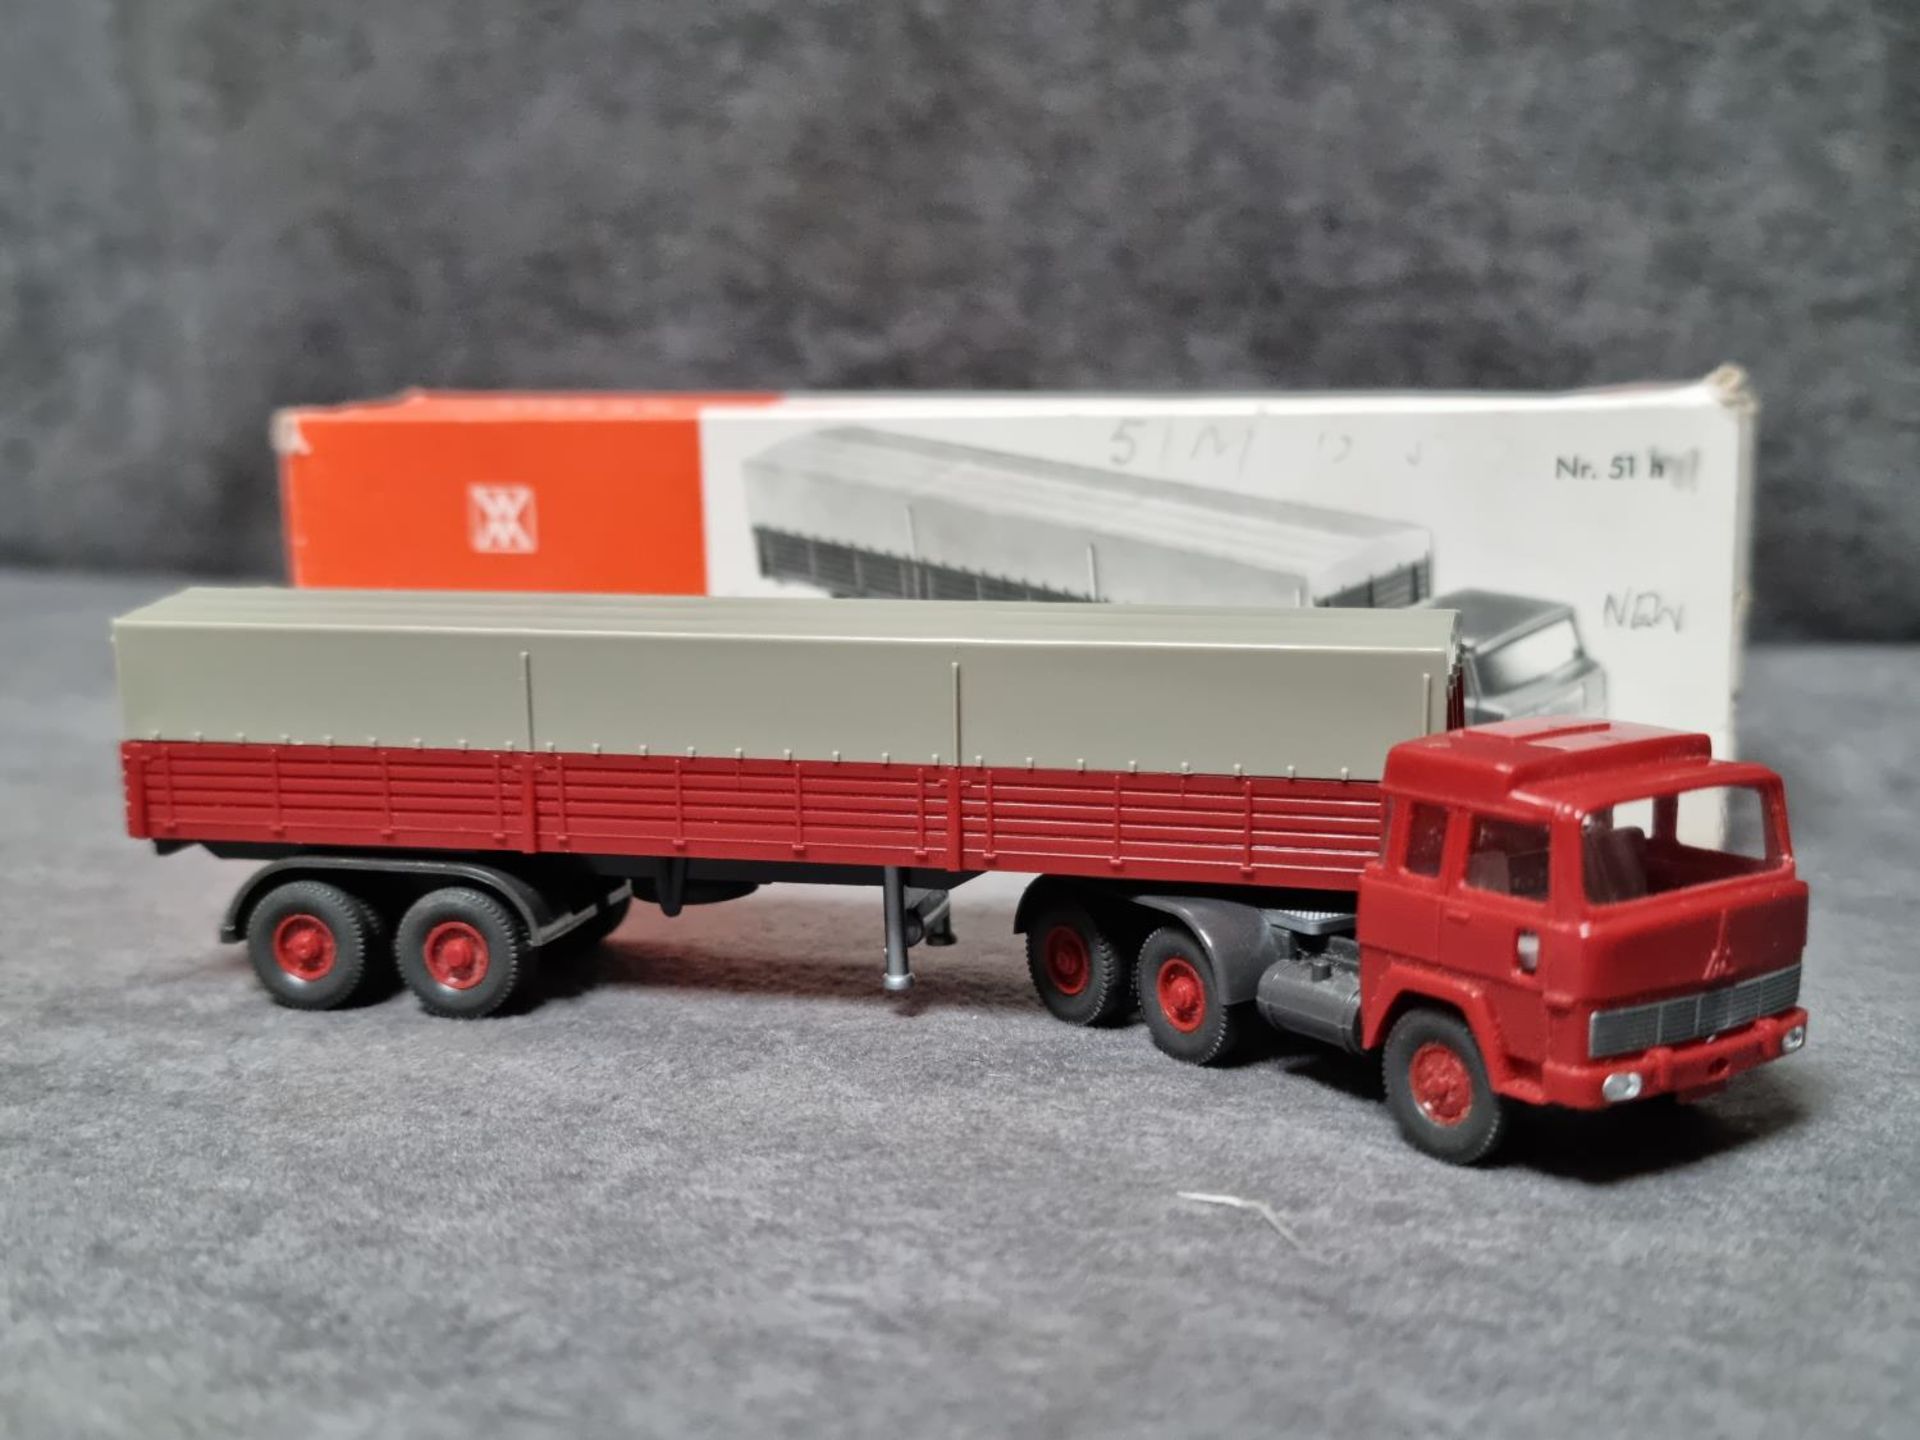 Wiking #51H 1972 Wiking Germany Ho Scale #51h Tractor Trailer Truck Diecast With Original Box - Image 2 of 2